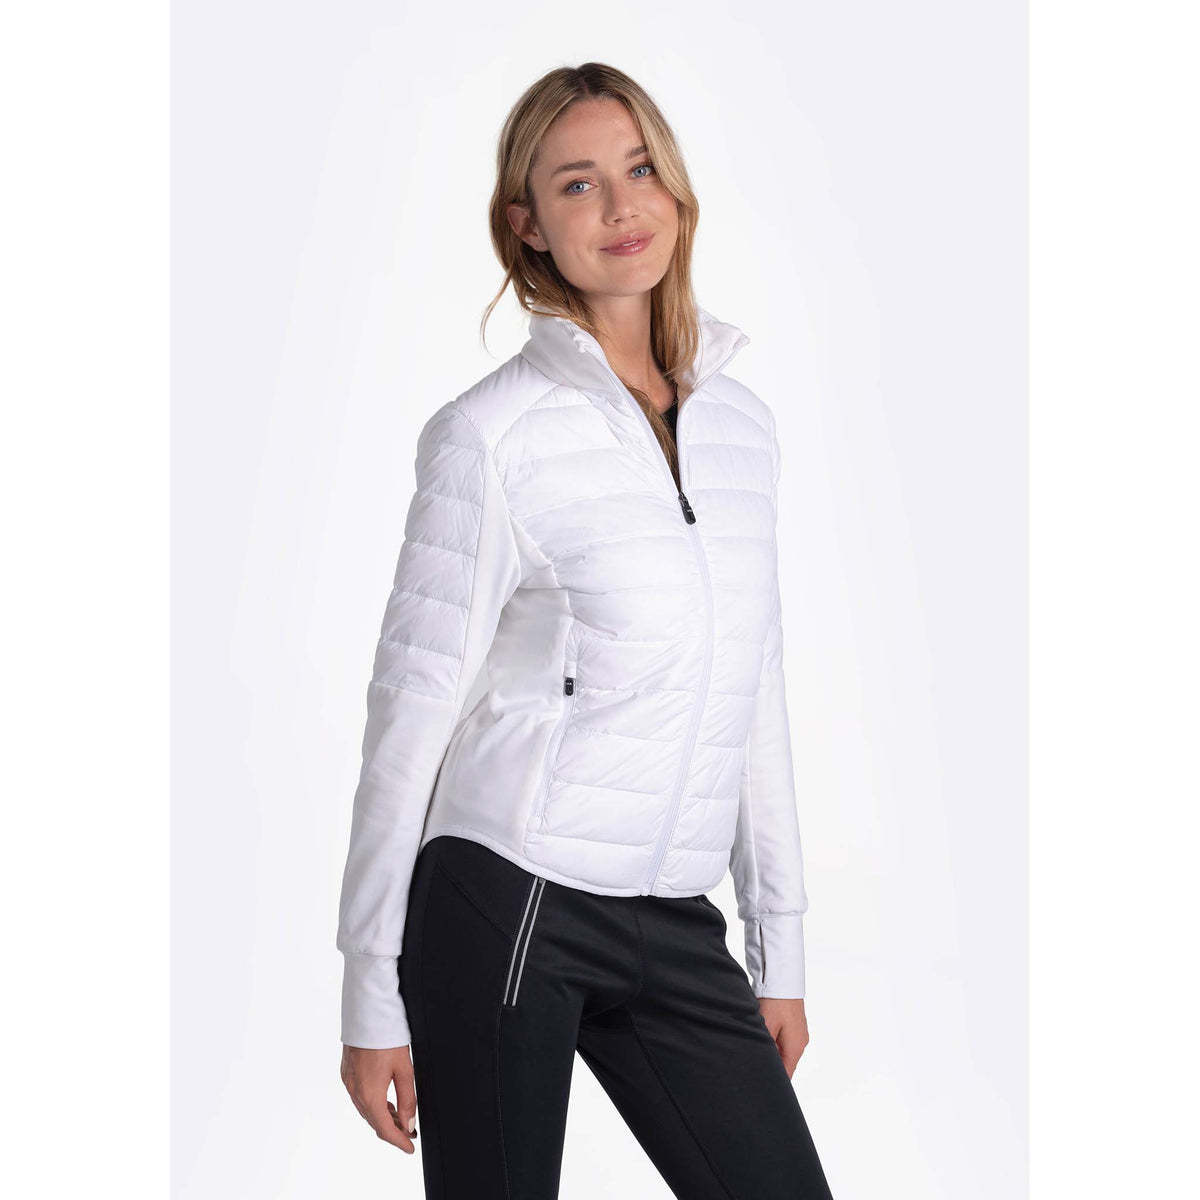 Lolë Just Full Zip cardigan sport blanc pour femme live lateral